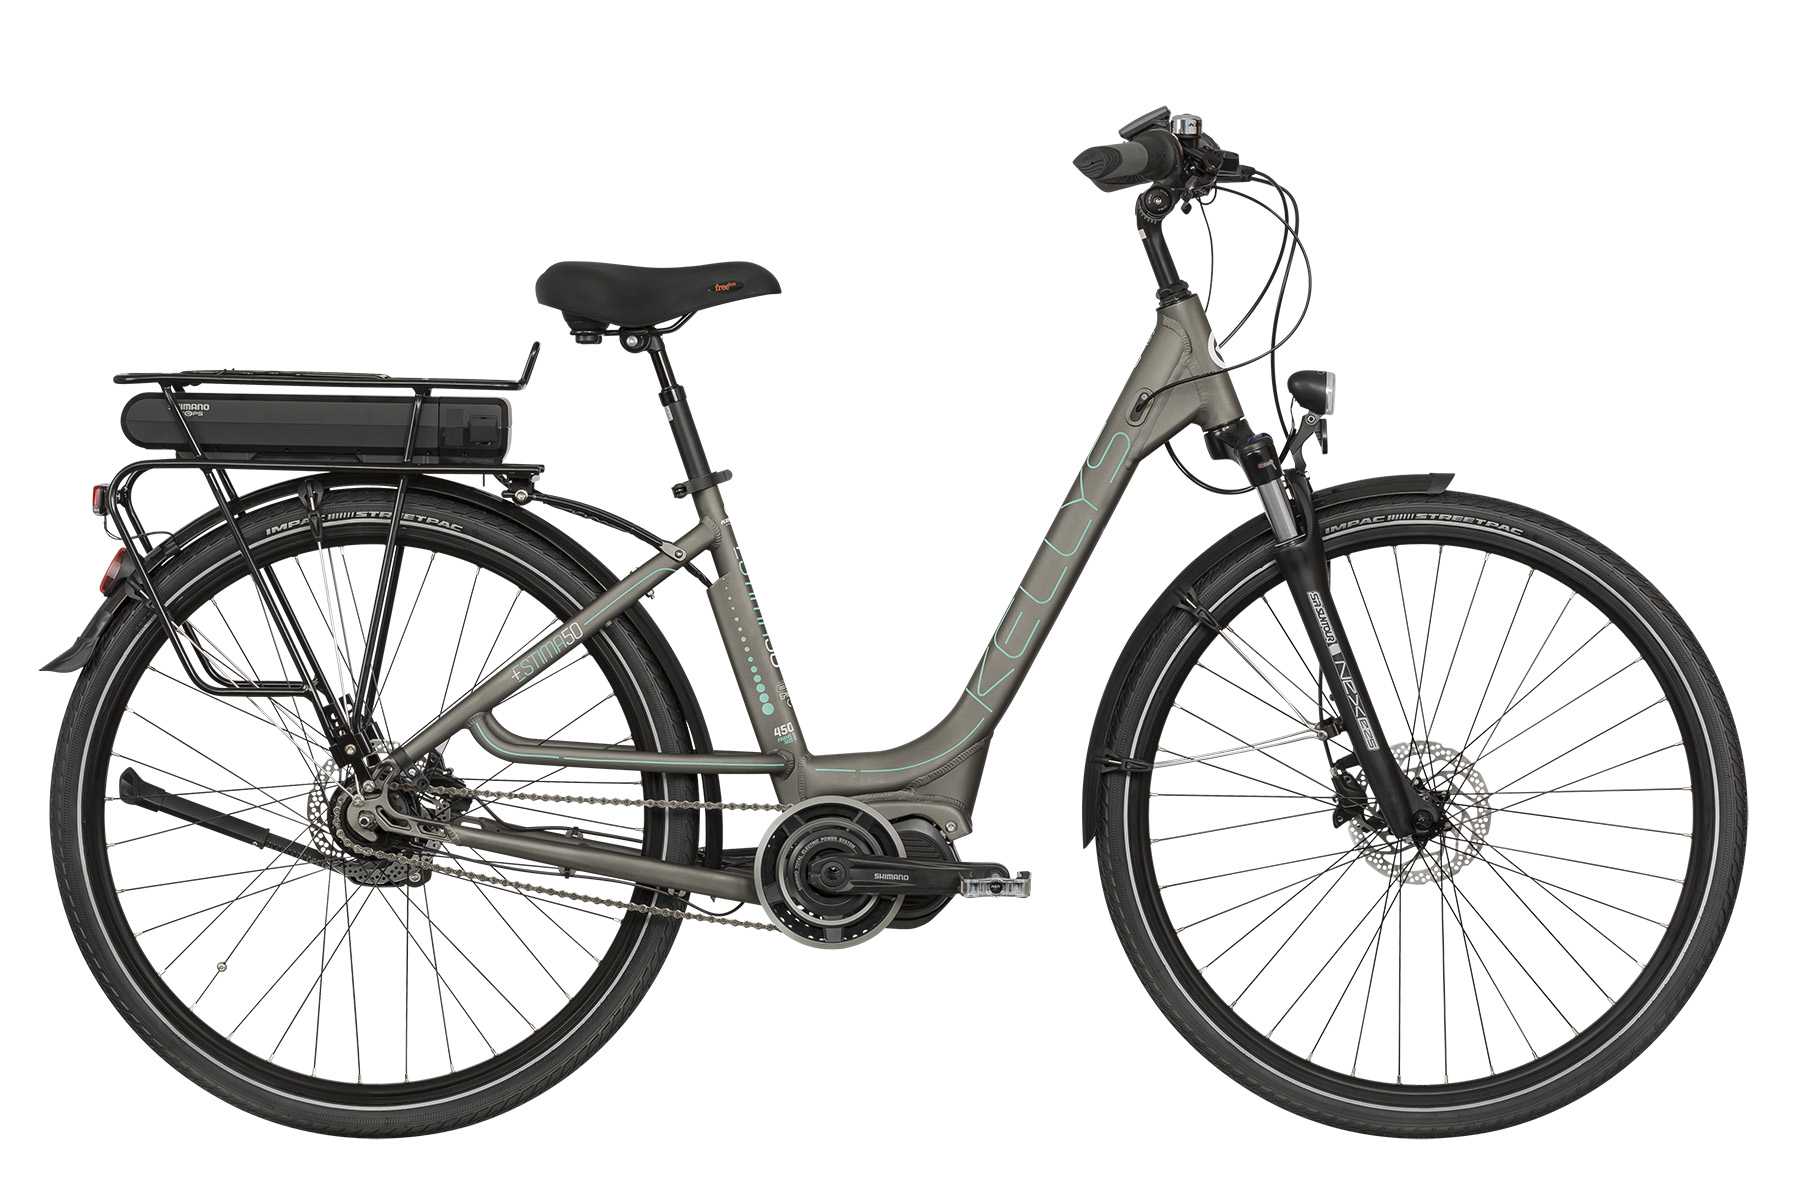 <strong>Ebike Kellys Estima 50,&nbsp;</strong>o bicicleta de oras cu 7 viteze in butuc si motor electric&nbsp;SHIMANO Steps E5000.</p><p><strong>City bike electric, </strong>cu cadrul usor de dama, echipata cu frane hidraulice Shimano si 2 ani garantie in magazinul Doua Roti.</p><p><strong>Cadru:</strong>&nbsp;KELLYS e-Power Aluminium alloy monotube 28<br /><strong>Marime Cadru:</strong>&nbsp;450mm (S) / 480mm (M)<br /><strong>E-unit drive:</strong>&nbsp;SHIMANO Steps E5000, 36V / battery SHIMANO BT-E6000, 418Wh / capacity 11.6Ah<br /><strong>Furca:</strong>&nbsp;SR SUNTOUR NEX-E25 HLO, 63mm, coil / Speed Lockout (threaded steerer 28.6mm)<br /><strong>Set cuveta:</strong>&nbsp;TH semi-integrated (threaded)<br /><strong>Anfrenaj:</strong>&nbsp;SHIMANO Steps E5000 (38) - length 175mm<br /><strong>Manete schimbator:</strong>&nbsp;SHIMANO Nexus SL-7S31 Revoshift / SW-E6010 switch for motor assist<br /><strong>Viteze:</strong>&nbsp;7<br /><strong>Pinion:</strong>&nbsp;SHIMANO for internal hub 18T<br /><strong>Lant:</strong>&nbsp;KMC Z33 (108 links)<br /><strong>Frane:</strong>&nbsp;SHIMANO M315 Hydraulic Disc<br /><strong>Butuci:</strong>&nbsp;SHIMANO TX505 Disc / SHIMANO Nexus C3001 Inter-7 Disc - Center Lock (36 holes)<br /><strong>Jante:</strong>&nbsp;KELLYS Scart 622x20 (36 holes)<br /><strong>Spite:</strong>&nbsp;stainless steel black<br /><strong>Anvelope:</strong>&nbsp;SCHWALBE Energizer Life 47-622 (28x1.75) ReflectiveLine<br /><strong>Pipa:</strong>&nbsp;KALLOY - adjustable - diam 25.4mm / length 90mm<br /><strong>Ghidon:</strong>&nbsp;steel RiseBar - diam 25.4mm / width 610mm<br /><strong>Mansoane:</strong>&nbsp;KLS 2Density ergonomic<br /><strong>Tija Sa:</strong>&nbsp;suspension - diam 27.2mm / length 350mm<br /><strong>Sa:</strong>&nbsp;SELLE ROYAL Freedom Royalgel<br /><strong>Pedale:</strong>&nbsp;VP NonSlip - alloy<br /><strong>Lumina Fata:</strong>&nbsp;LED E-bike<br /><strong>Lumina Spate:</strong>&nbsp;LED E-bike<br /><strong>Aparatori:</strong>&nbsp;RPZ<br /><strong>Accesorii:</strong>&nbsp;alloy carrier, kickstand, bell<br /><strong>Motor:</strong>&nbsp;SHIMANO Steps E5000, 36V